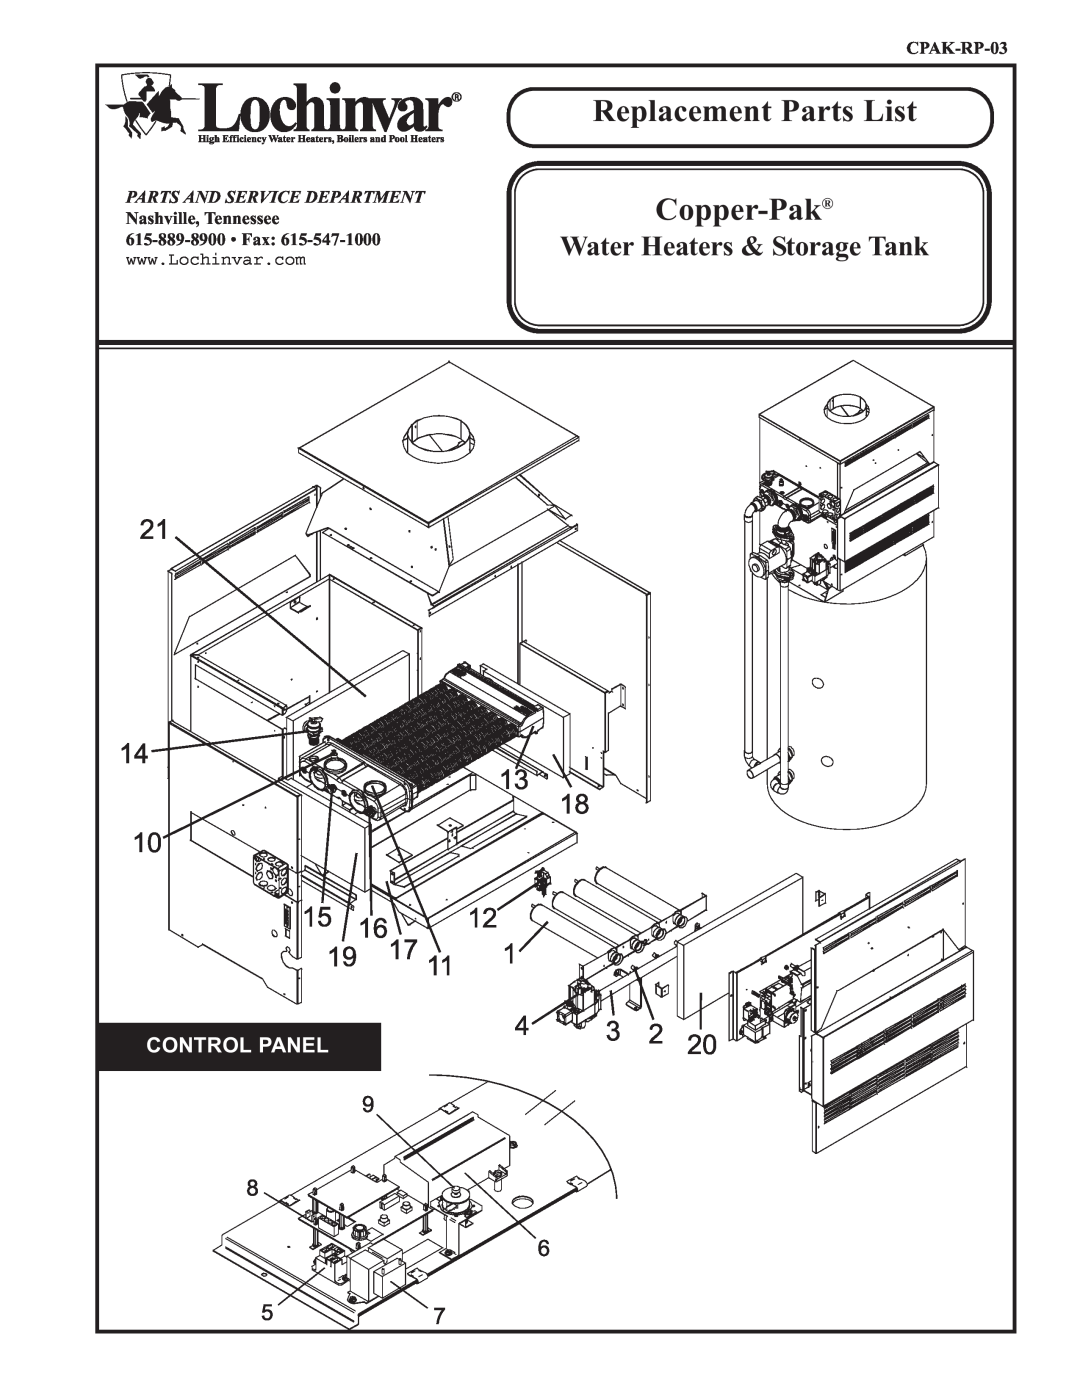 Lochinvar Copper-Pak manual Replacement Parts List, Water Heaters & Storage Tank, Control Panel, CPAK-RP-03 